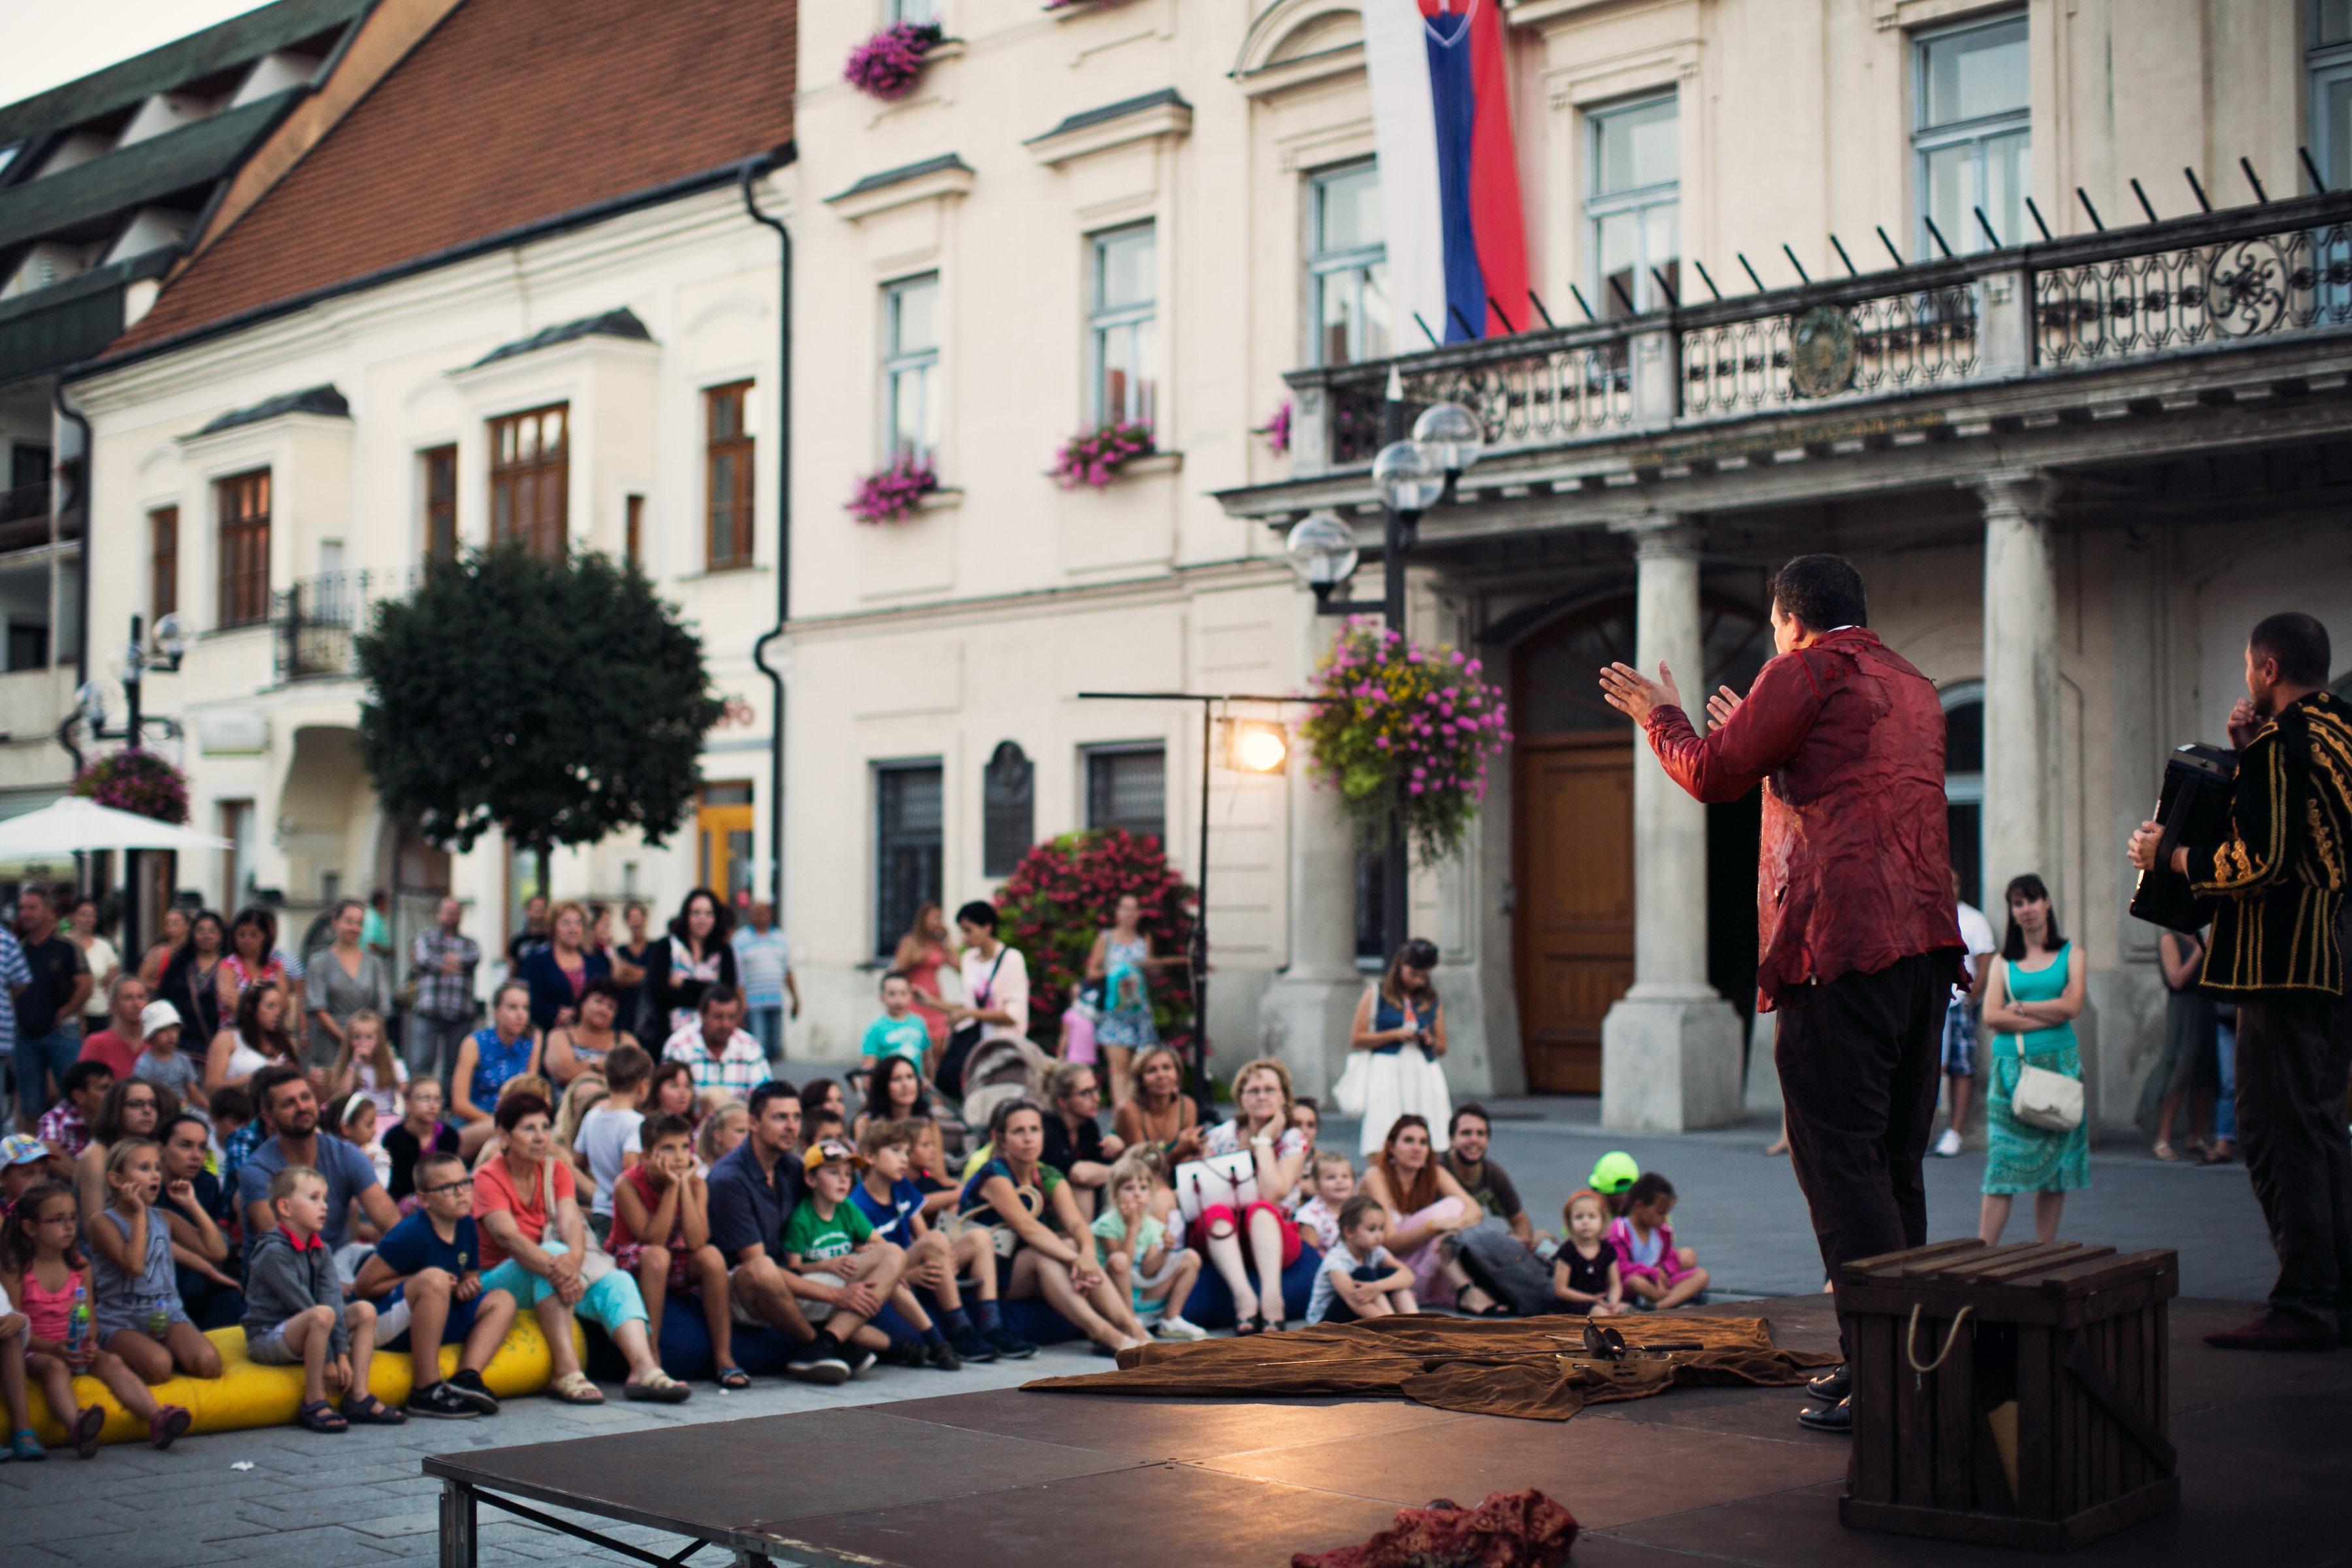 TROB Presents Donation to “Wandering Theatre” Performing Group in Trnava